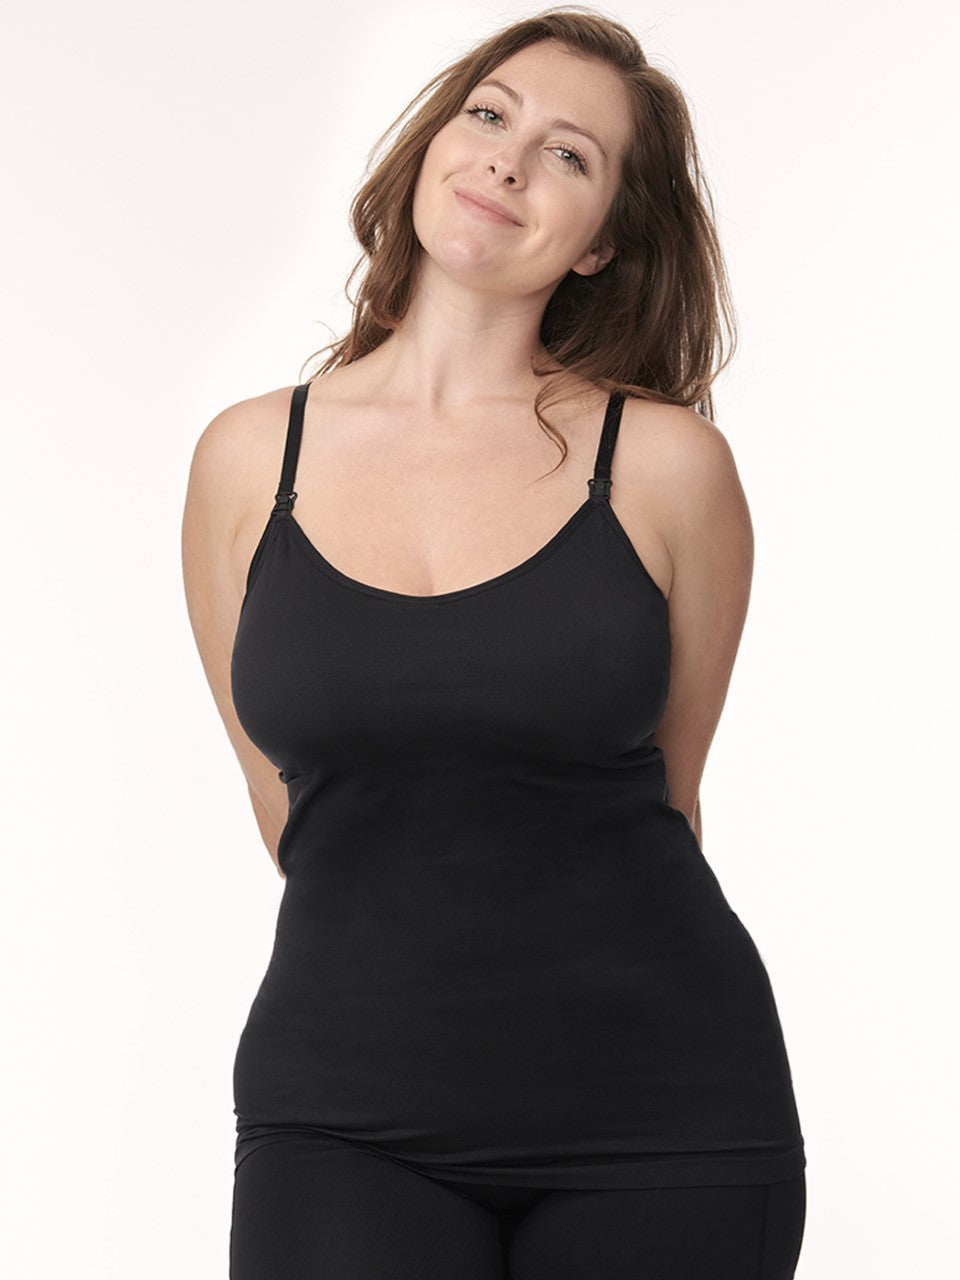 Maternity Nursing Camisole with Built-In Bra, Style 4957